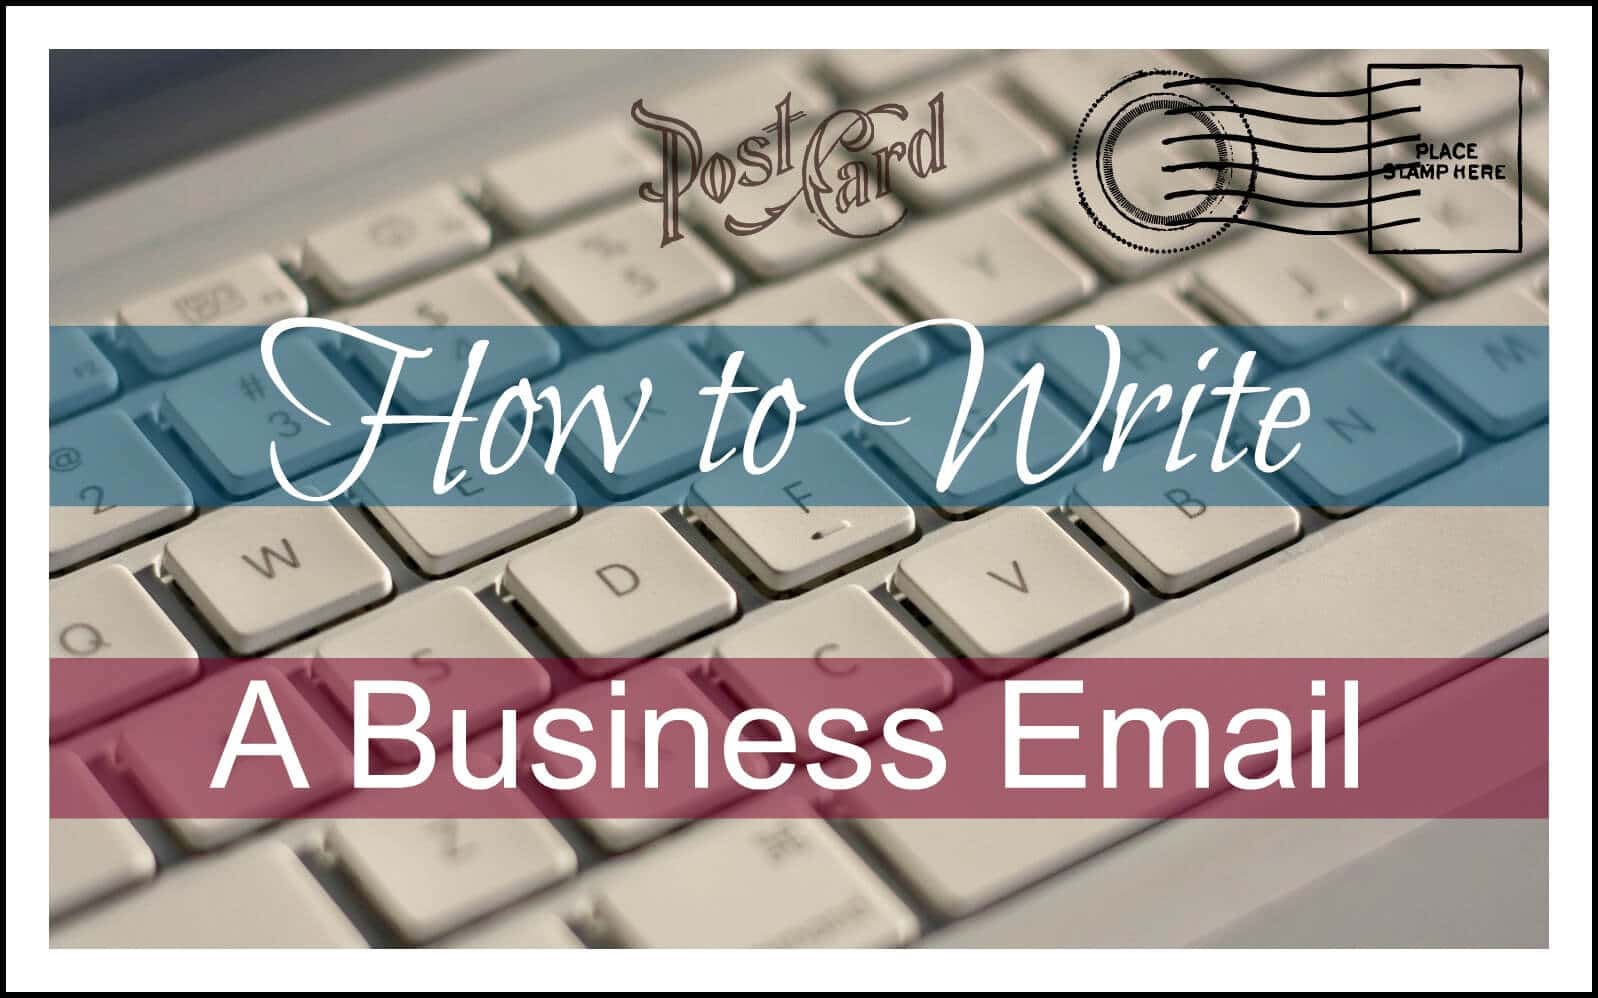 How to write a business email